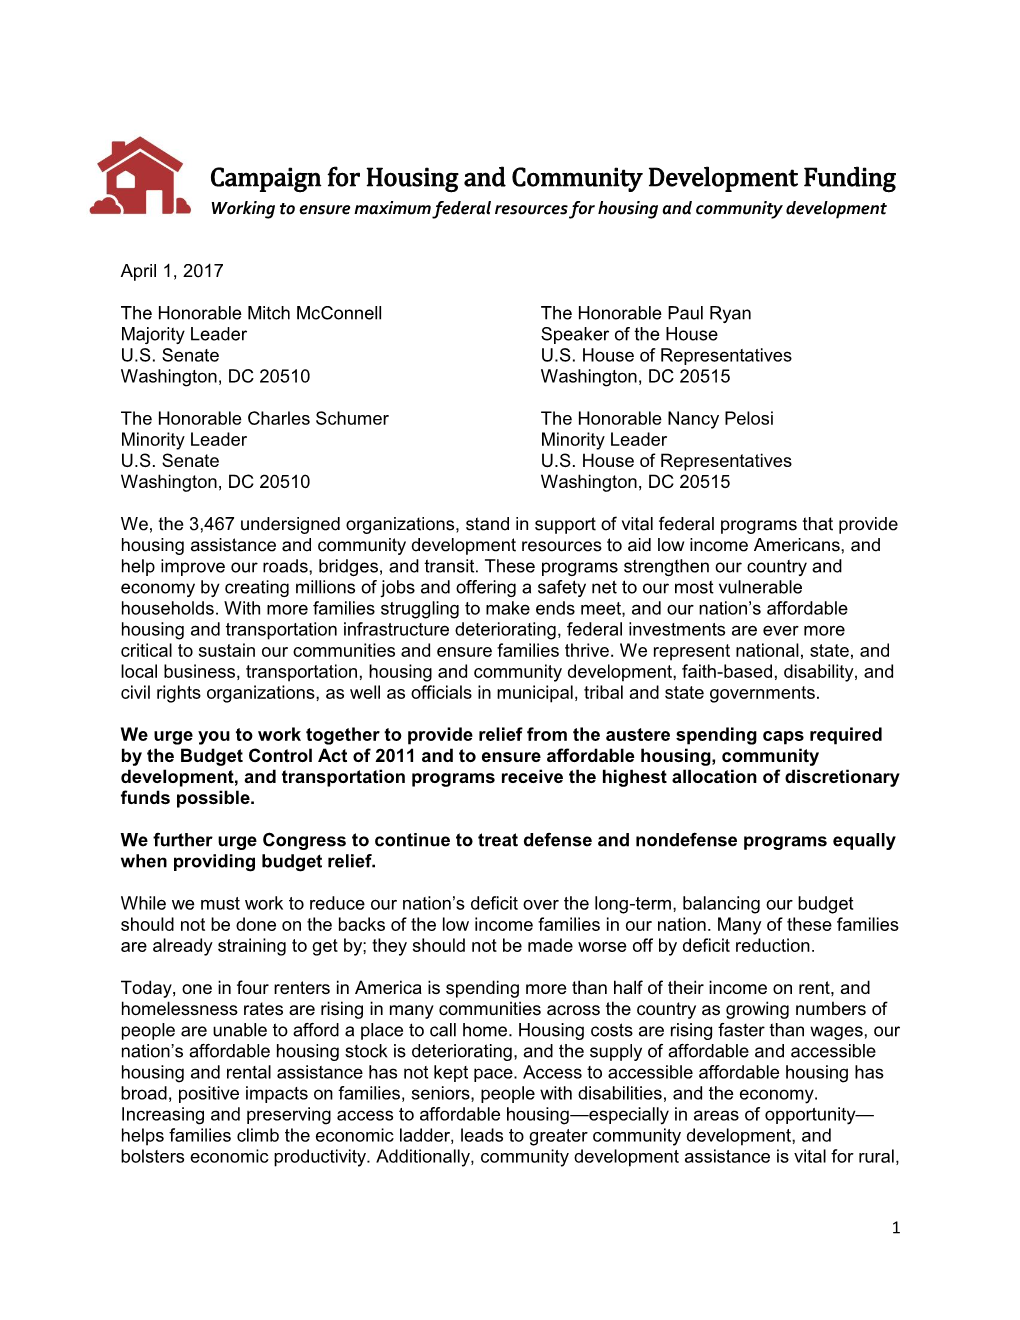 Campaign for Housing and Community Development Funding Working to Ensure Maximum Federal Resources for Housing and Community Development